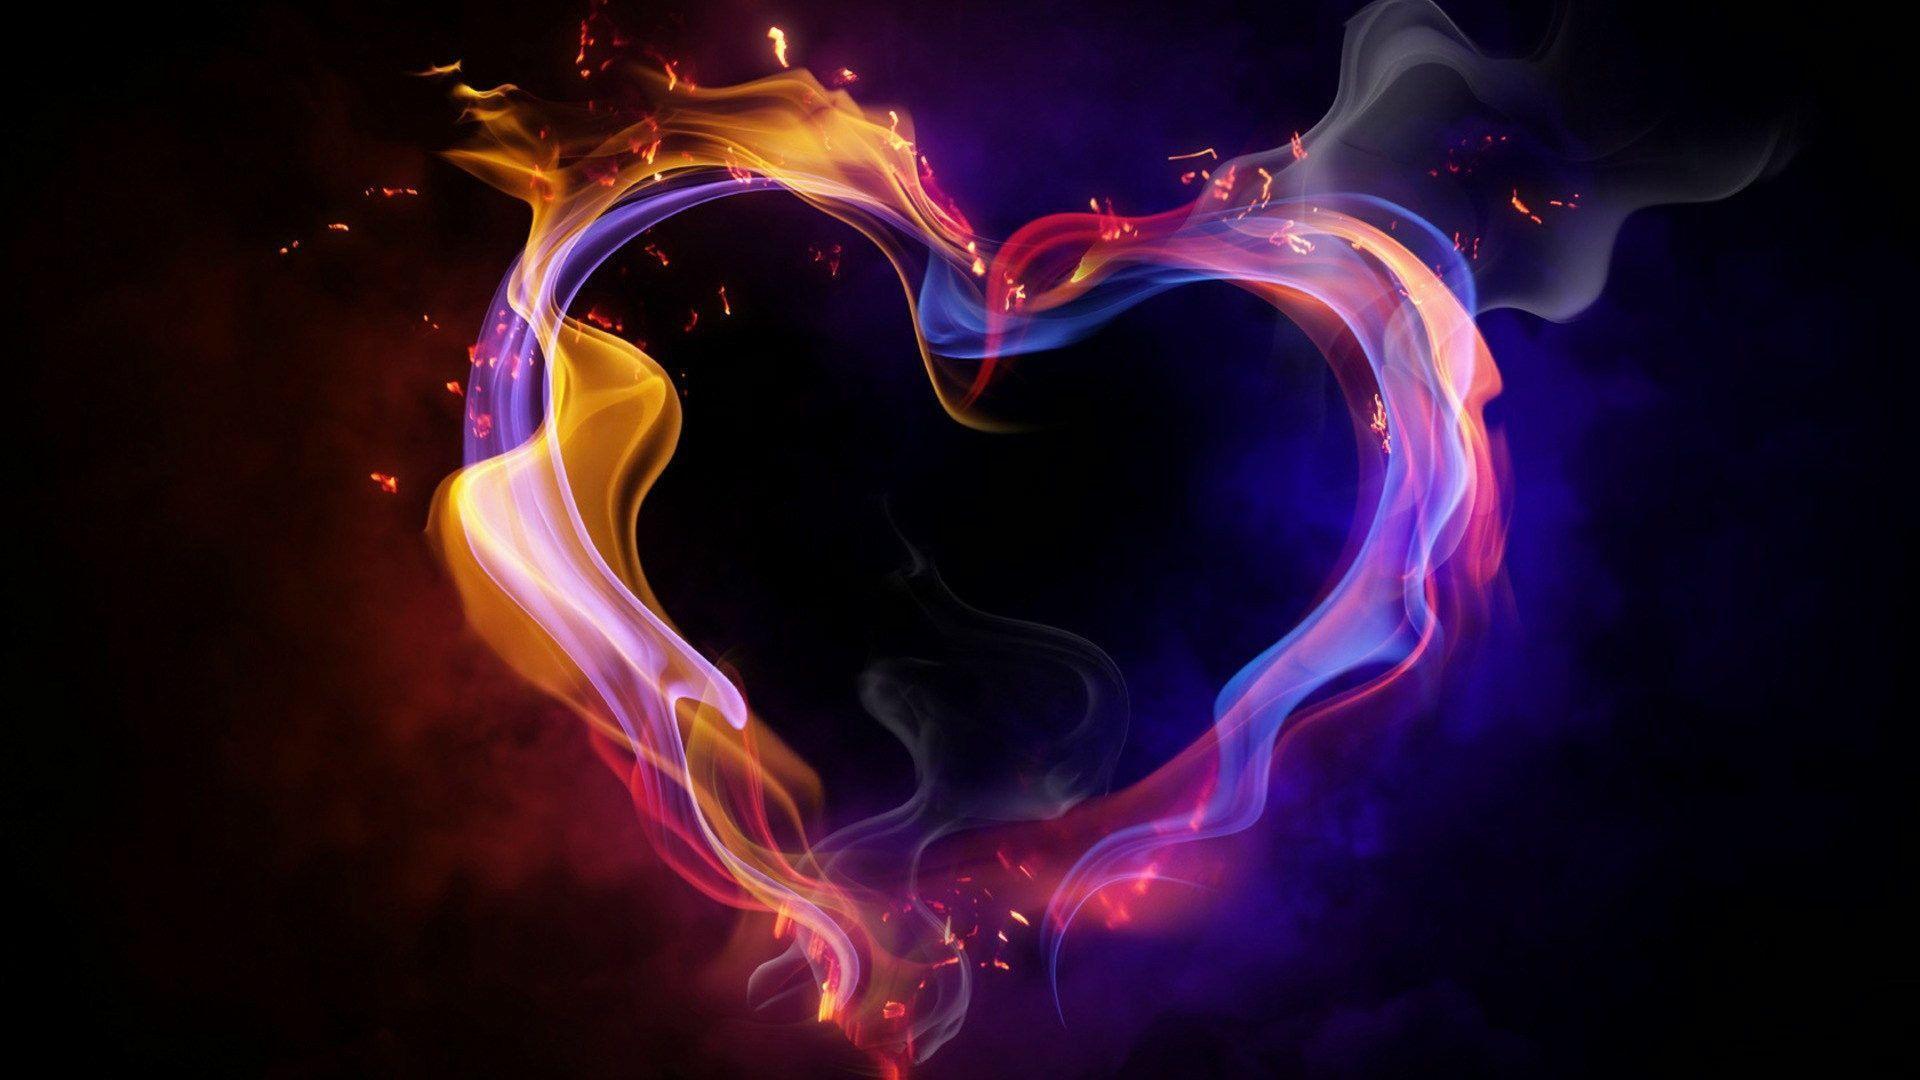 Hd 1920x1080 Cool Color Abstract Heart Desktop Wallpaper Background